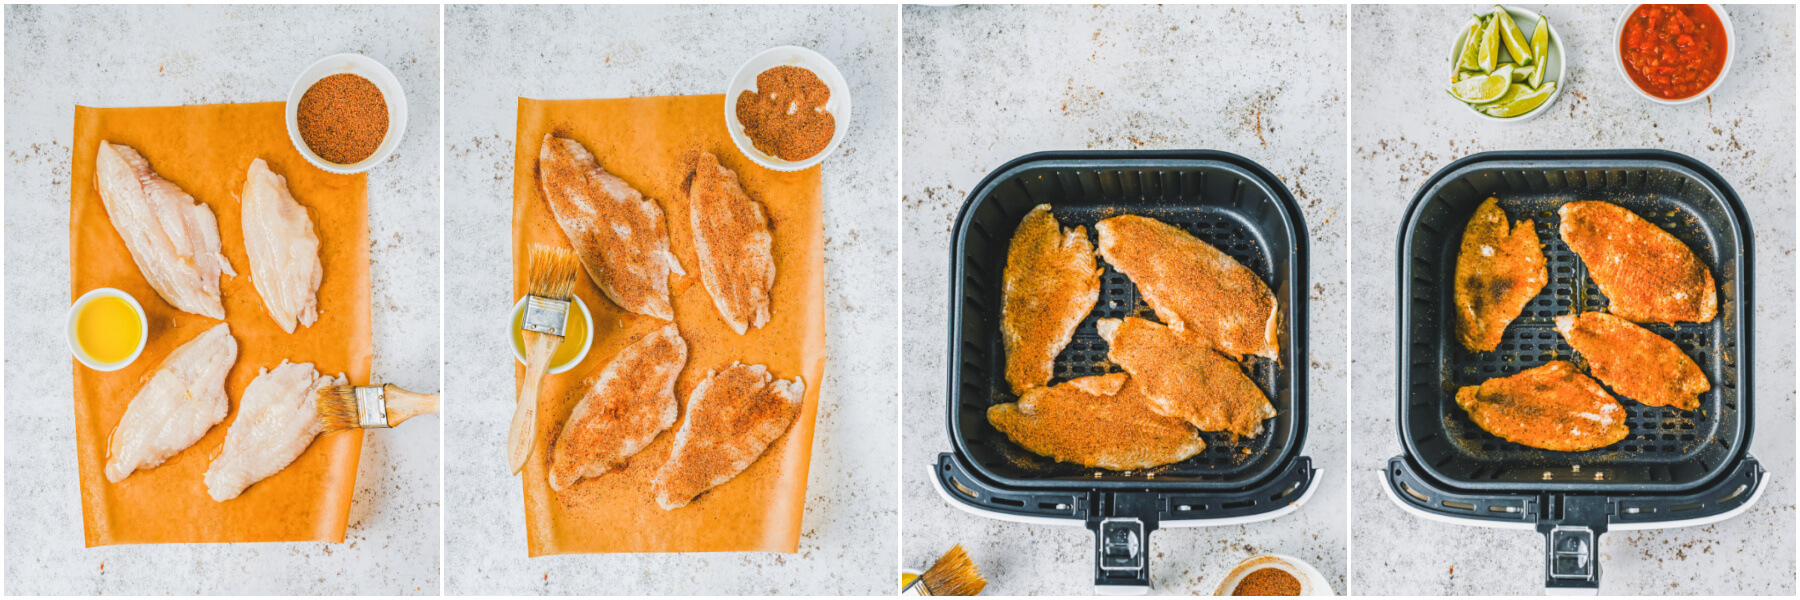 Process images showing how to apply blackening seasoning to fish fillets and how to cook them in an air fryer.